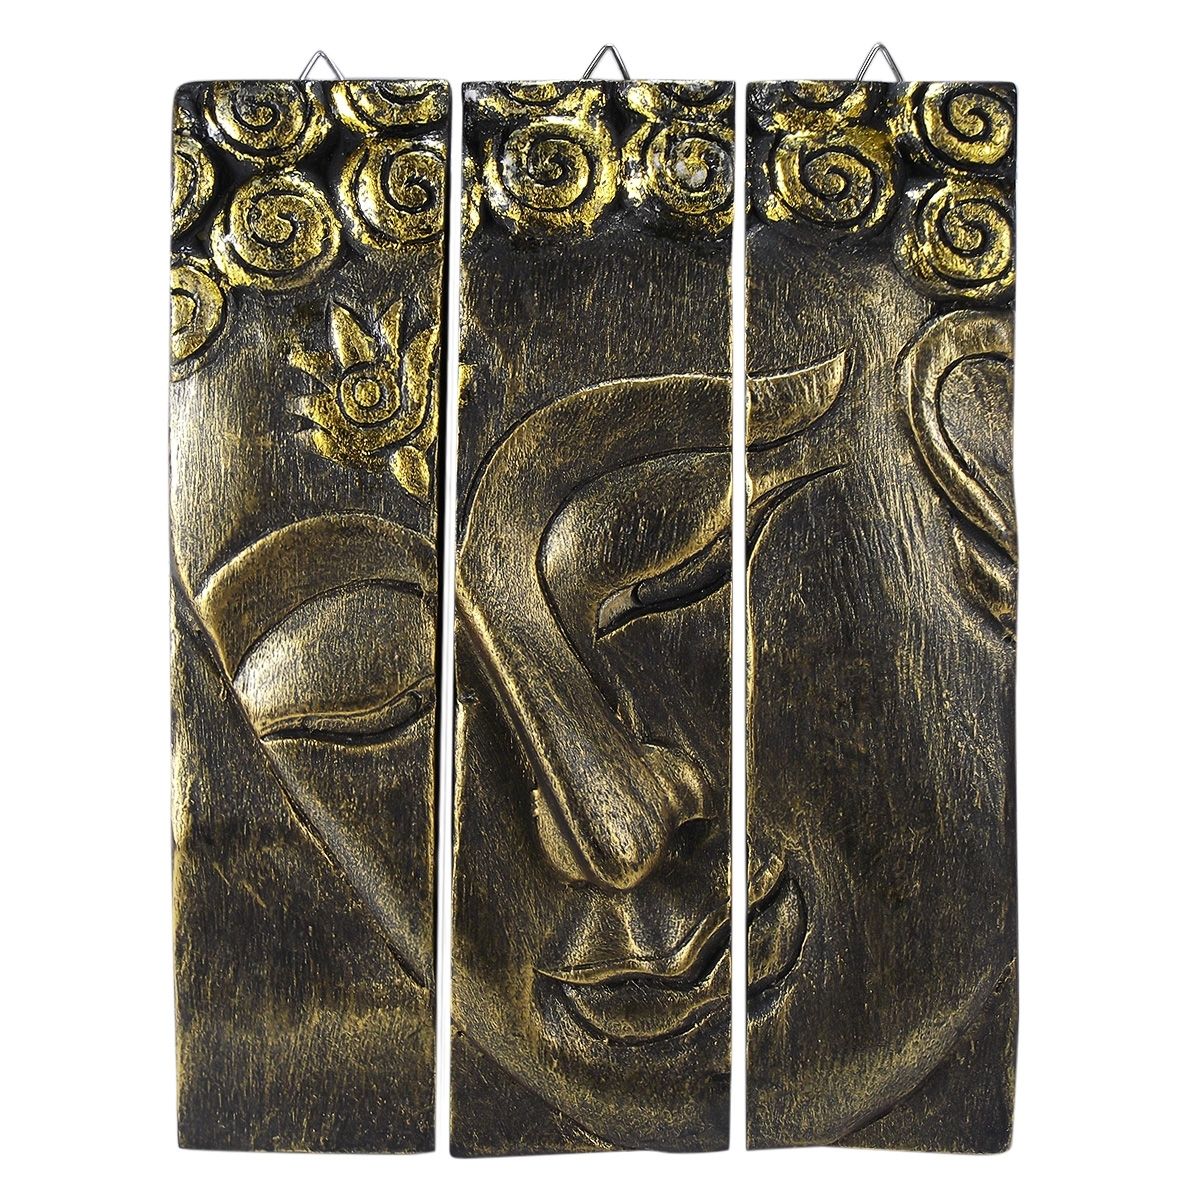 Well Liked Golden Buddha Face Three Panel Hand Carved Wood Wall Art 8x10 Throughout Buddha Wood Wall Art (View 4 of 15)